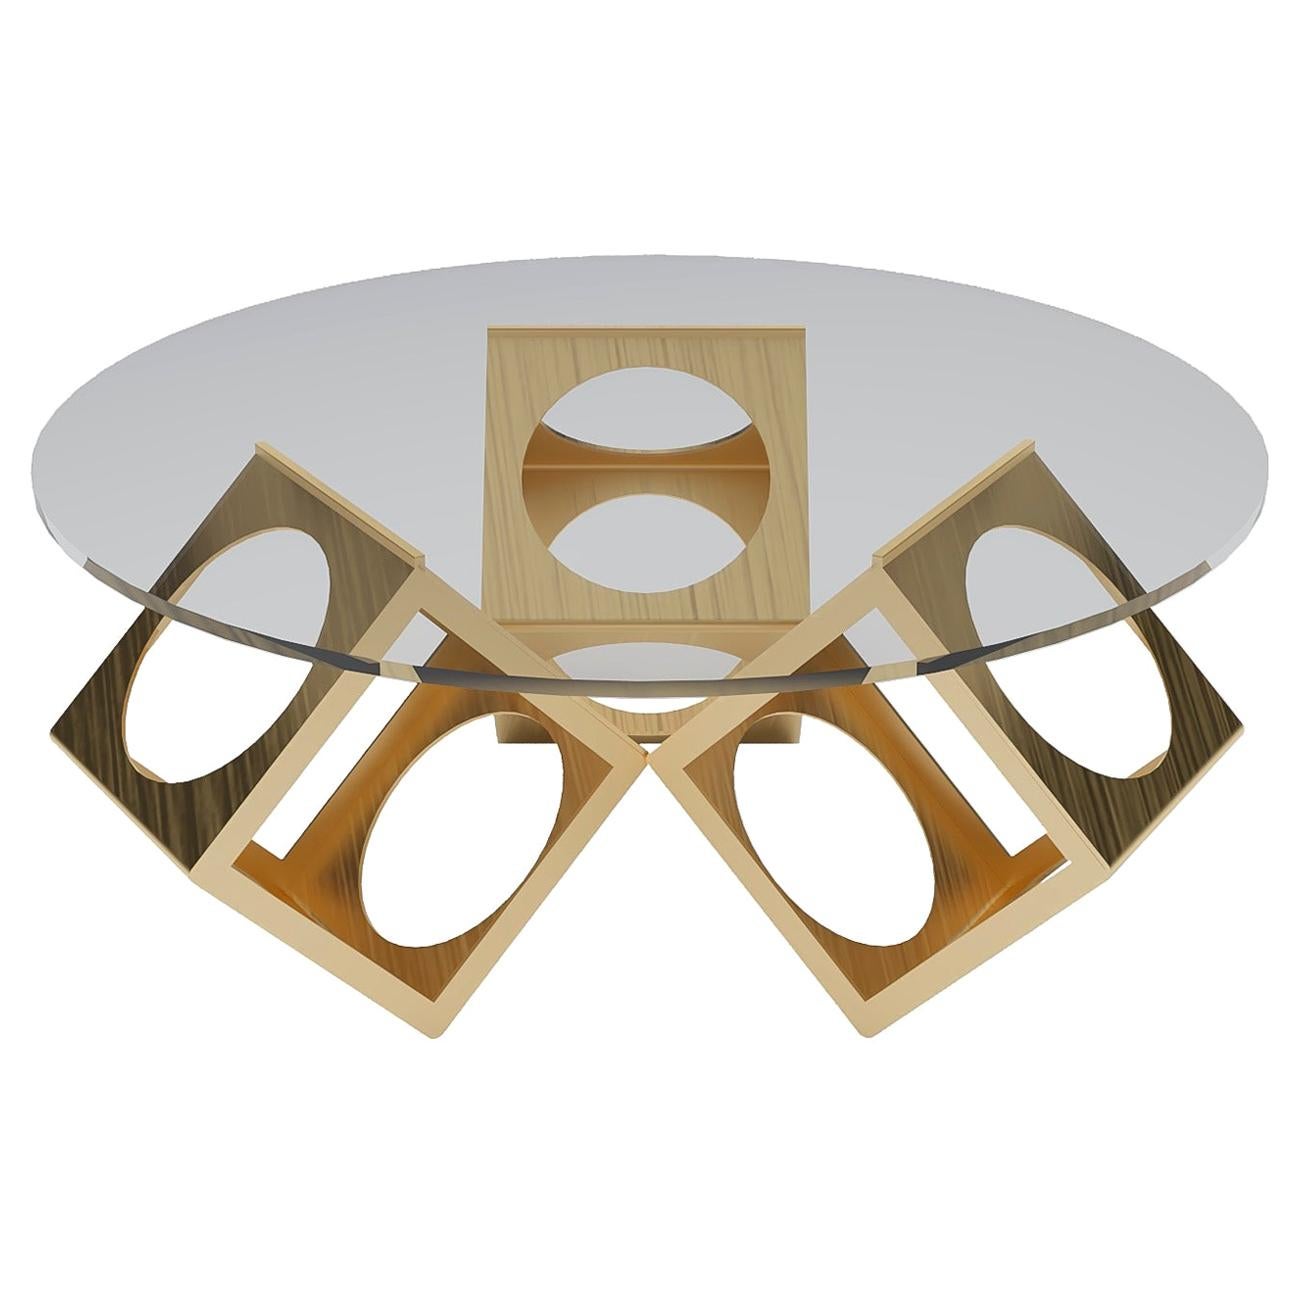 The Round Box Table Designed by Laurie Beckerman